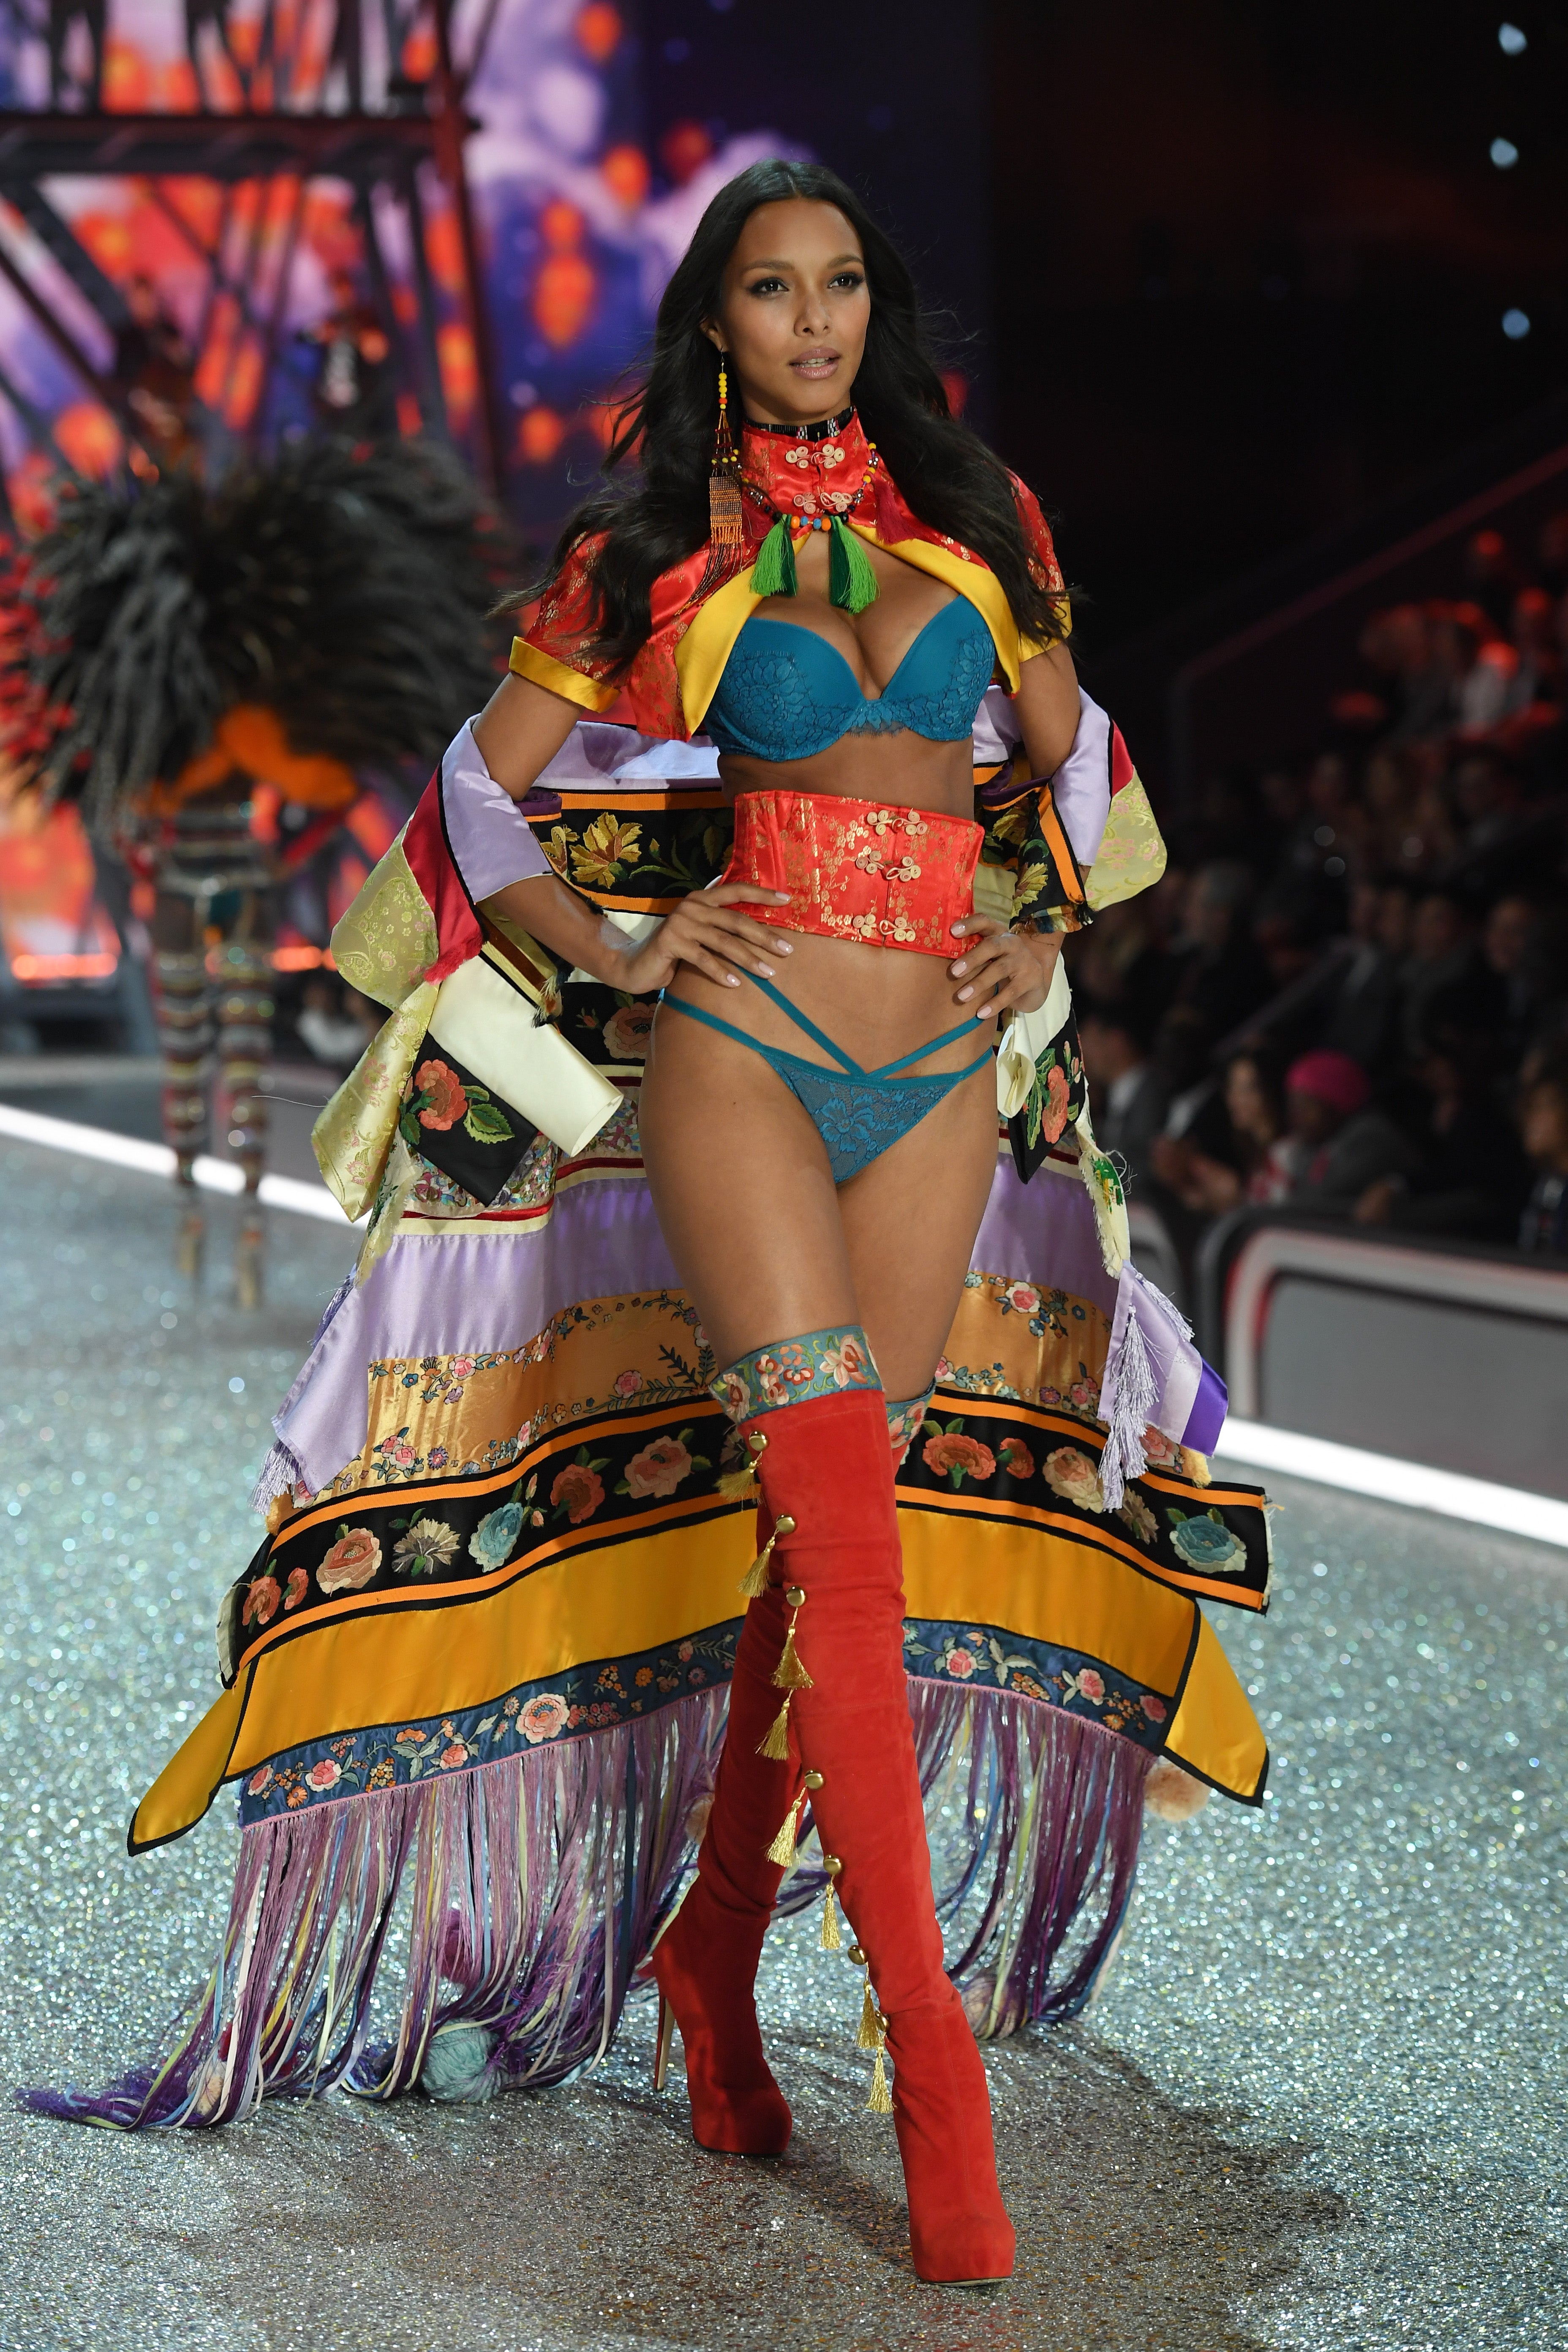 All The Best Pics From the 2016 Victoria's Secret Fashion Show
